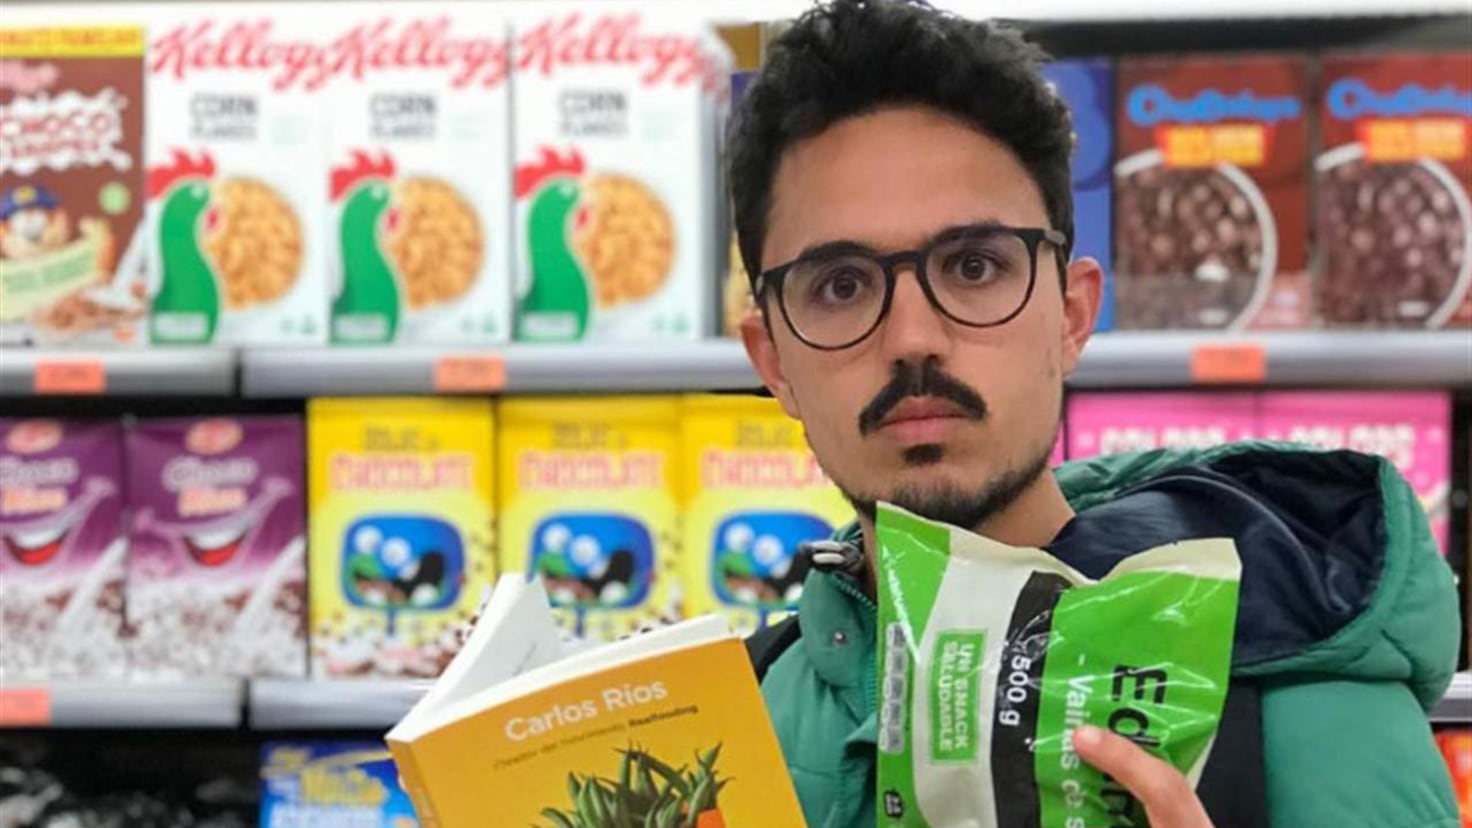 The Government investigates the influencer Carlos Ros for unfair advertising on networks
